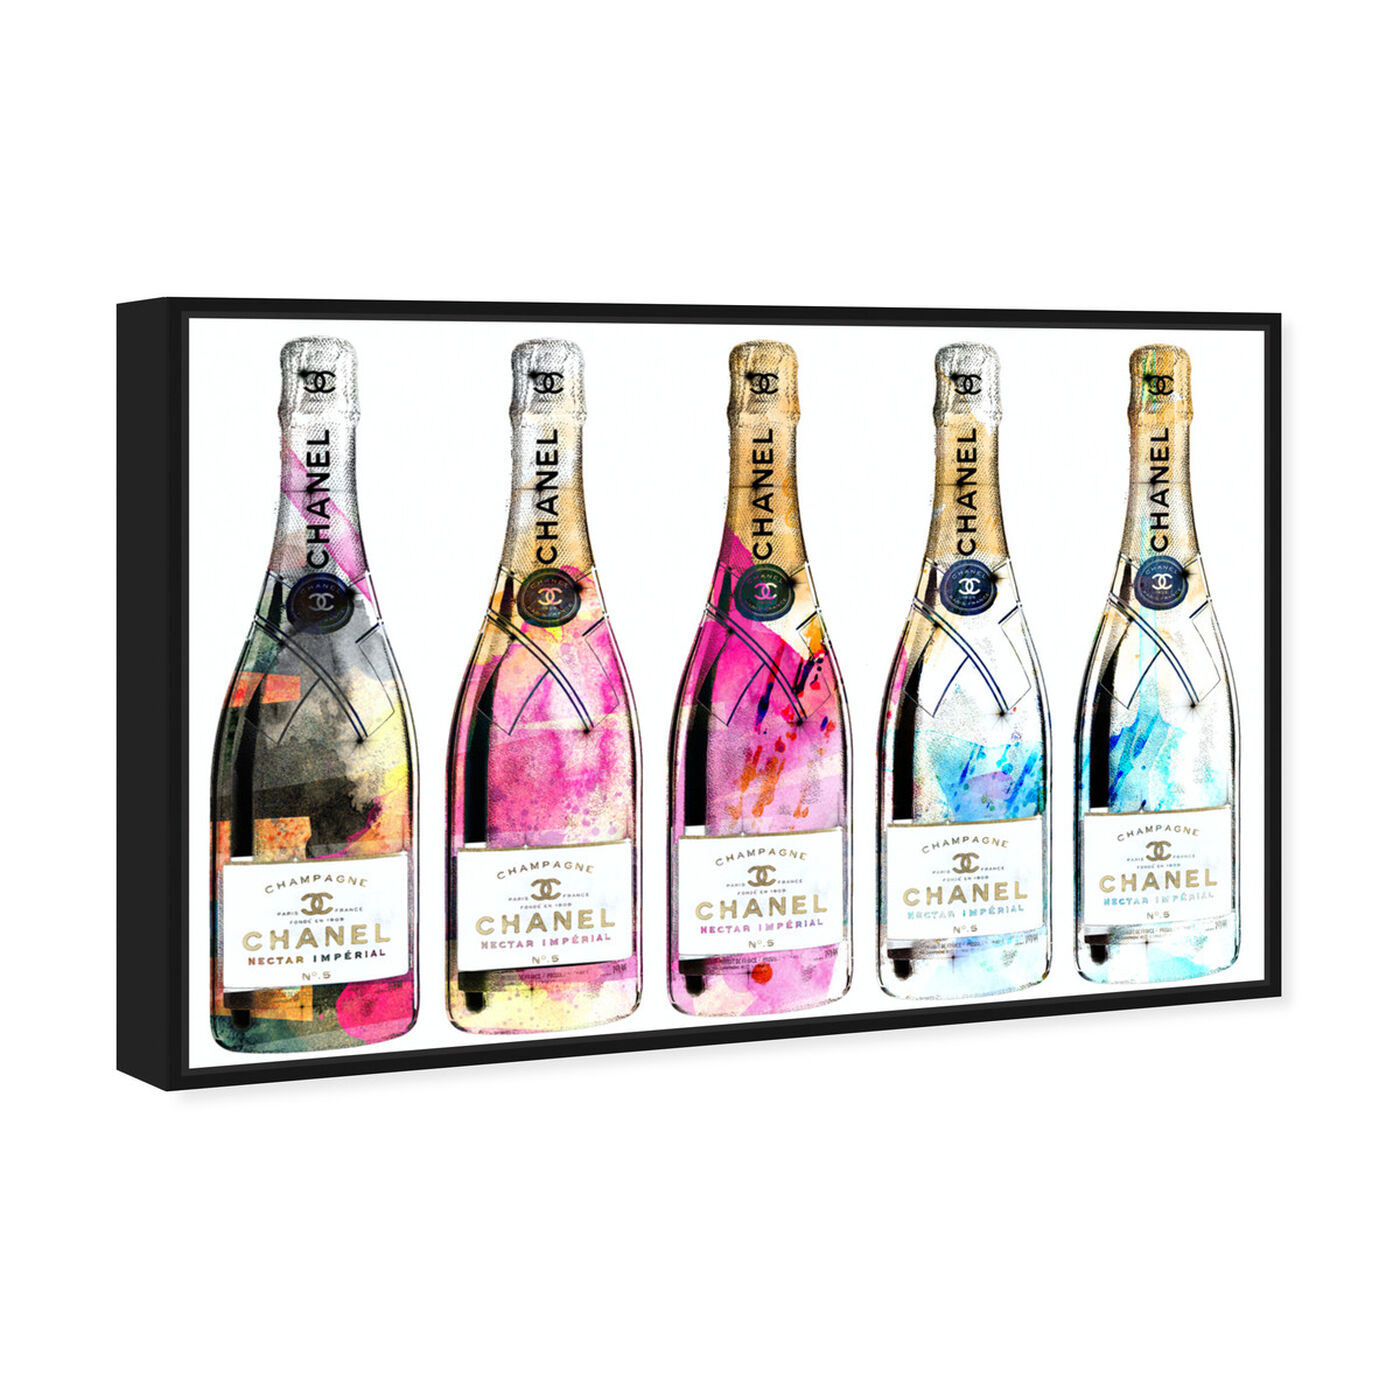 Angled view of Drink Up Champagne featuring fashion and glam and lifestyle art.